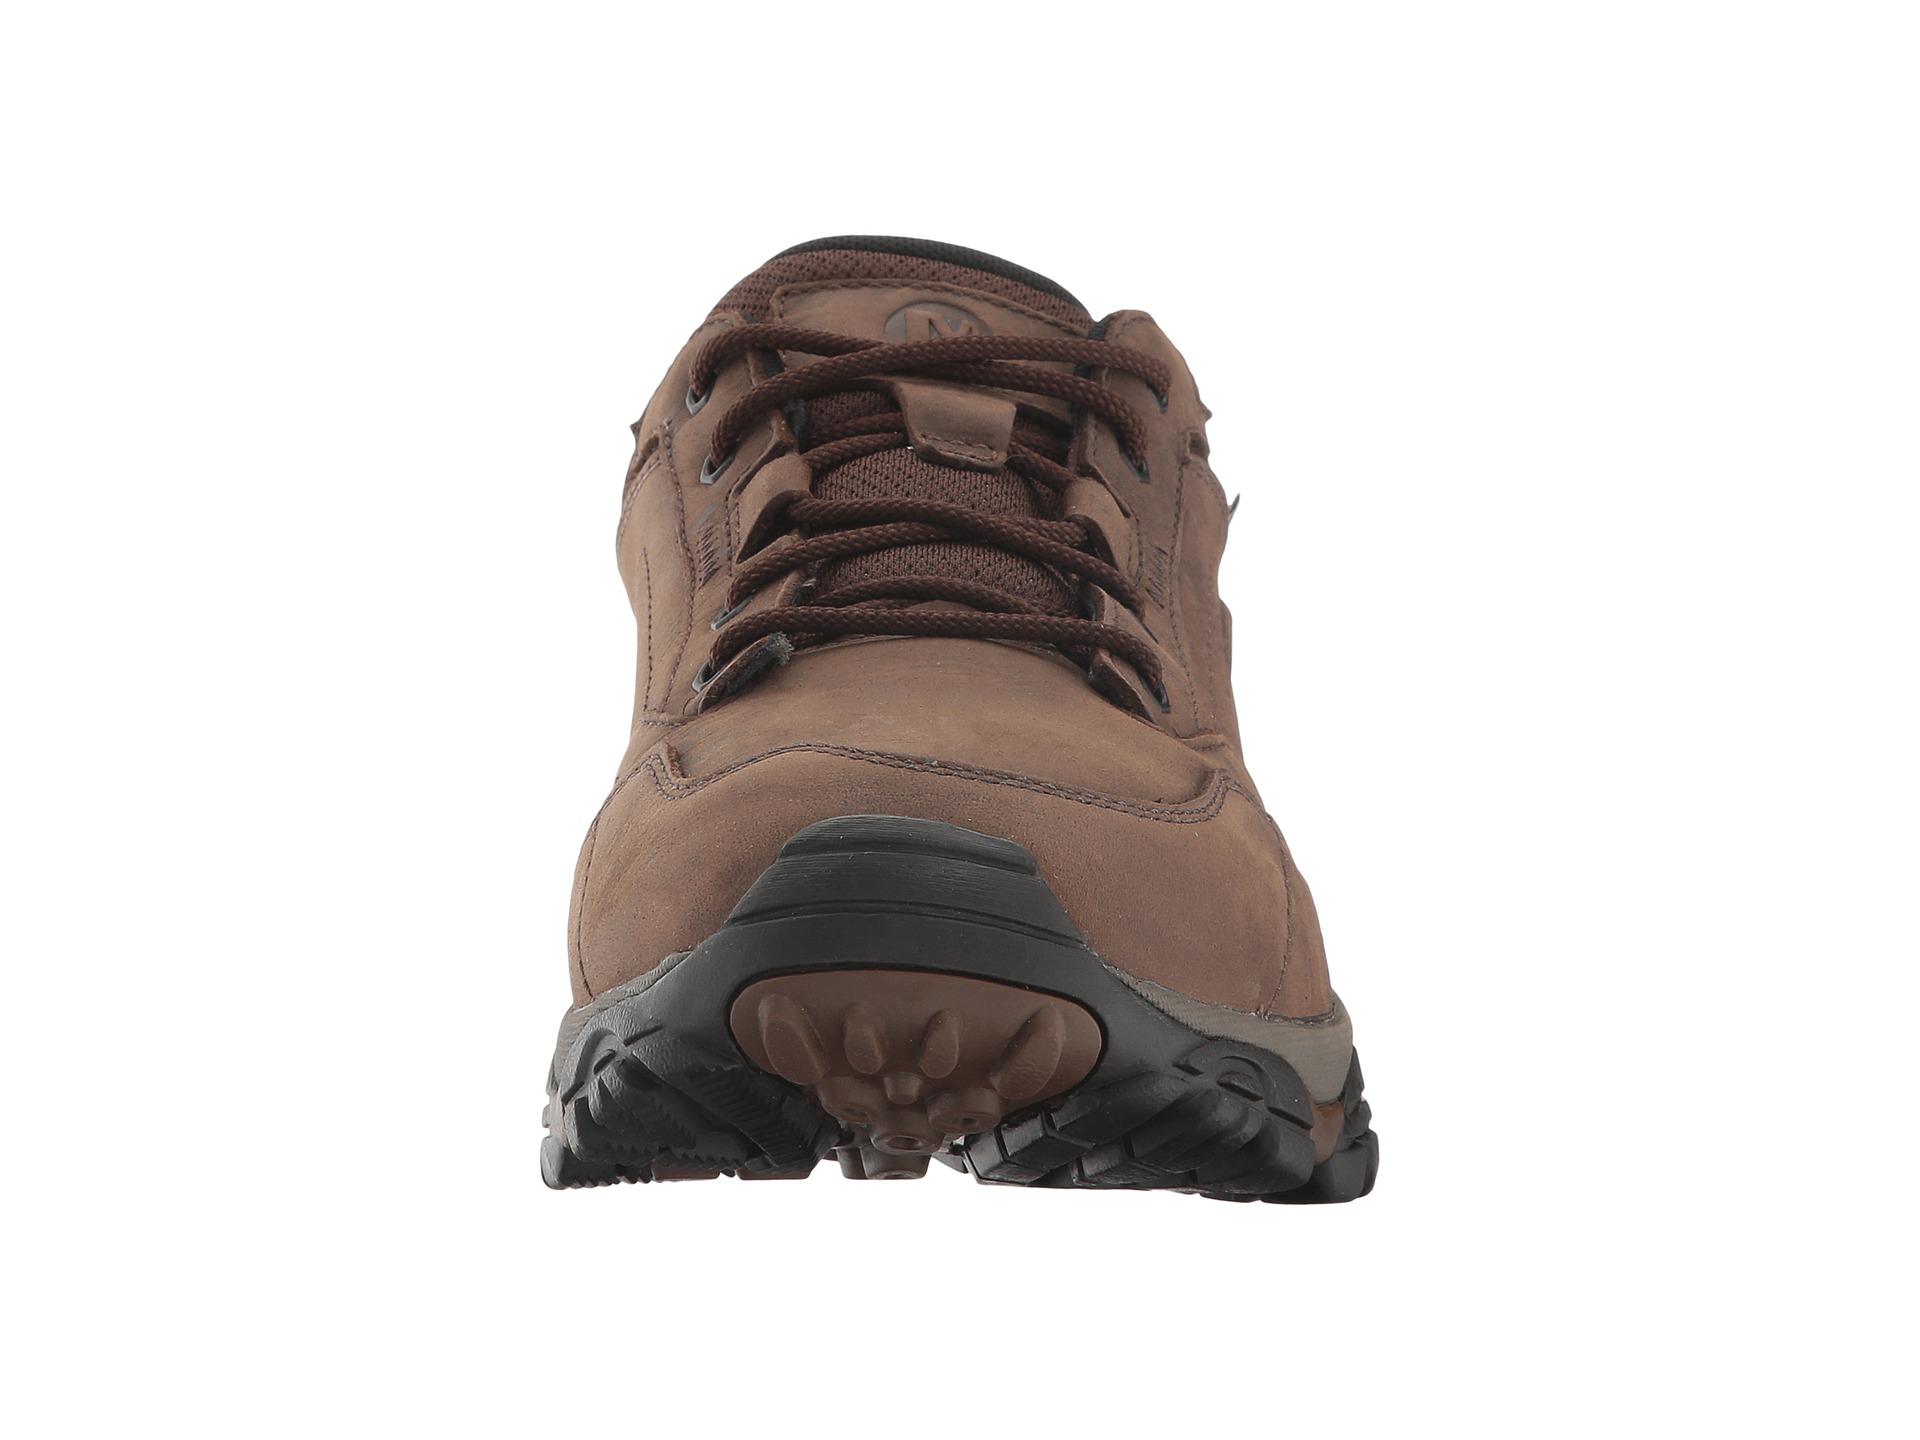 Merrell Moab Adventure Lace Waterproof at Zappos.com